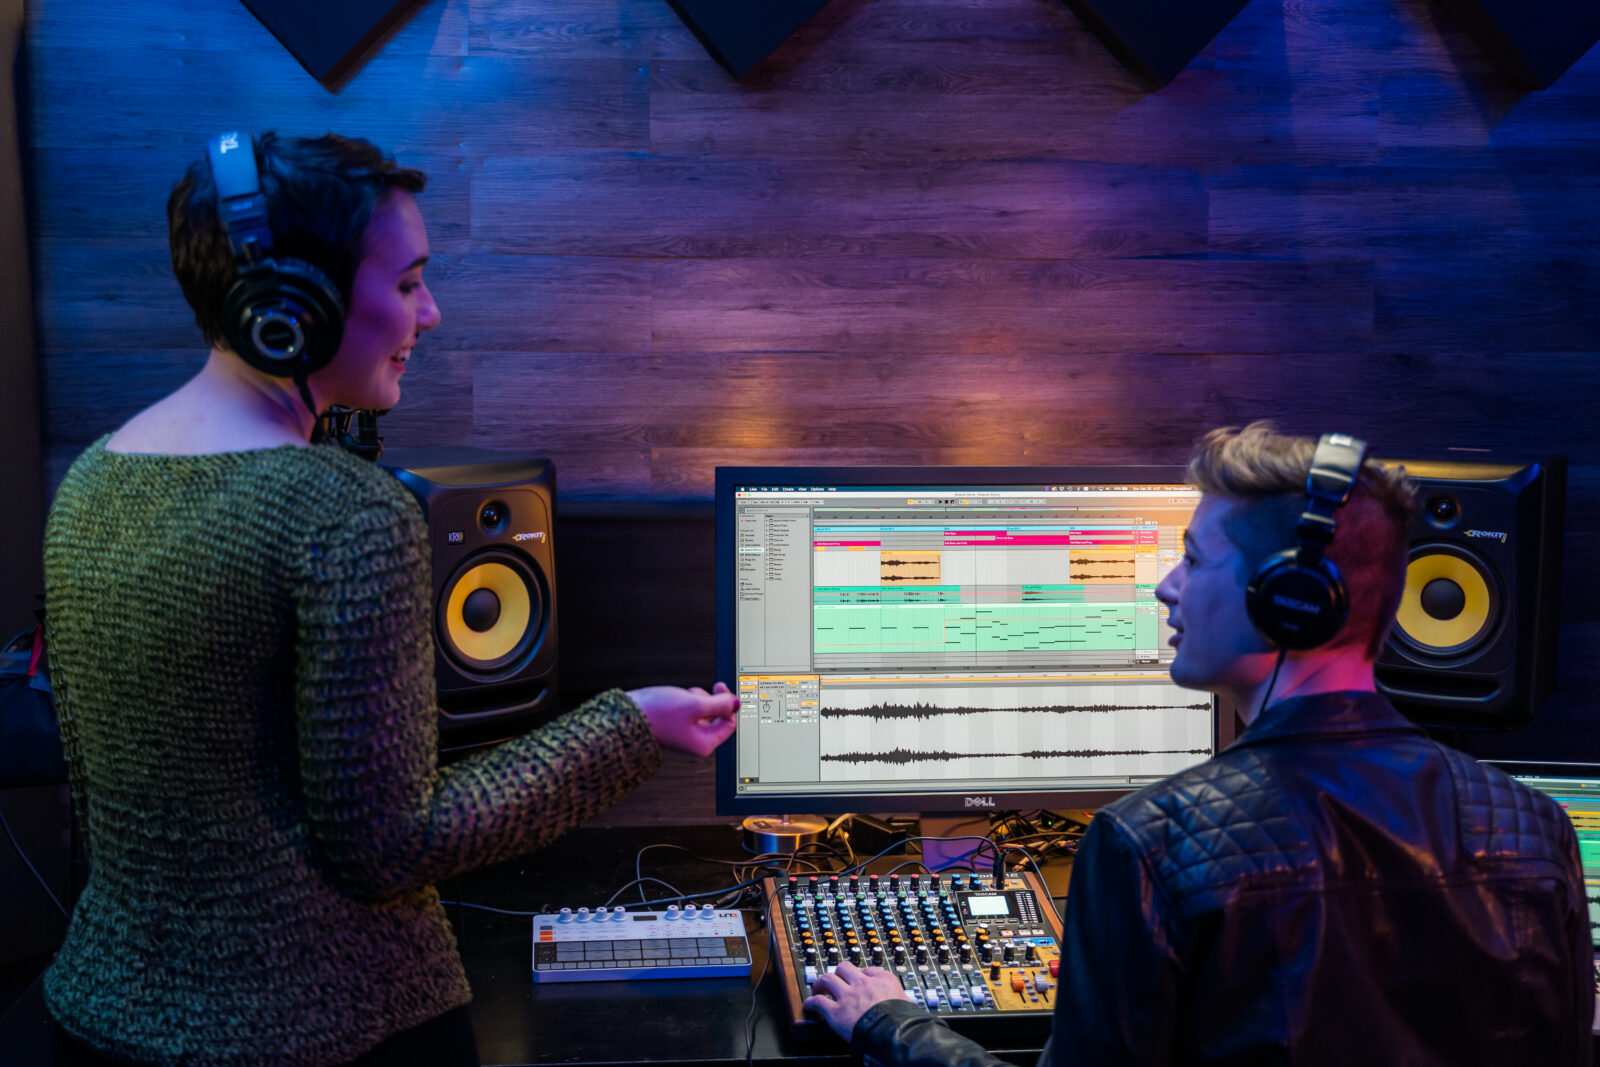 Two people in a recording studio wearing headphones and talking to each other. The person to the right sits in front of a monitor screen showing a multitrack recording program. Their left hand rests on the faders of a Tascam Model 12 mixing console.